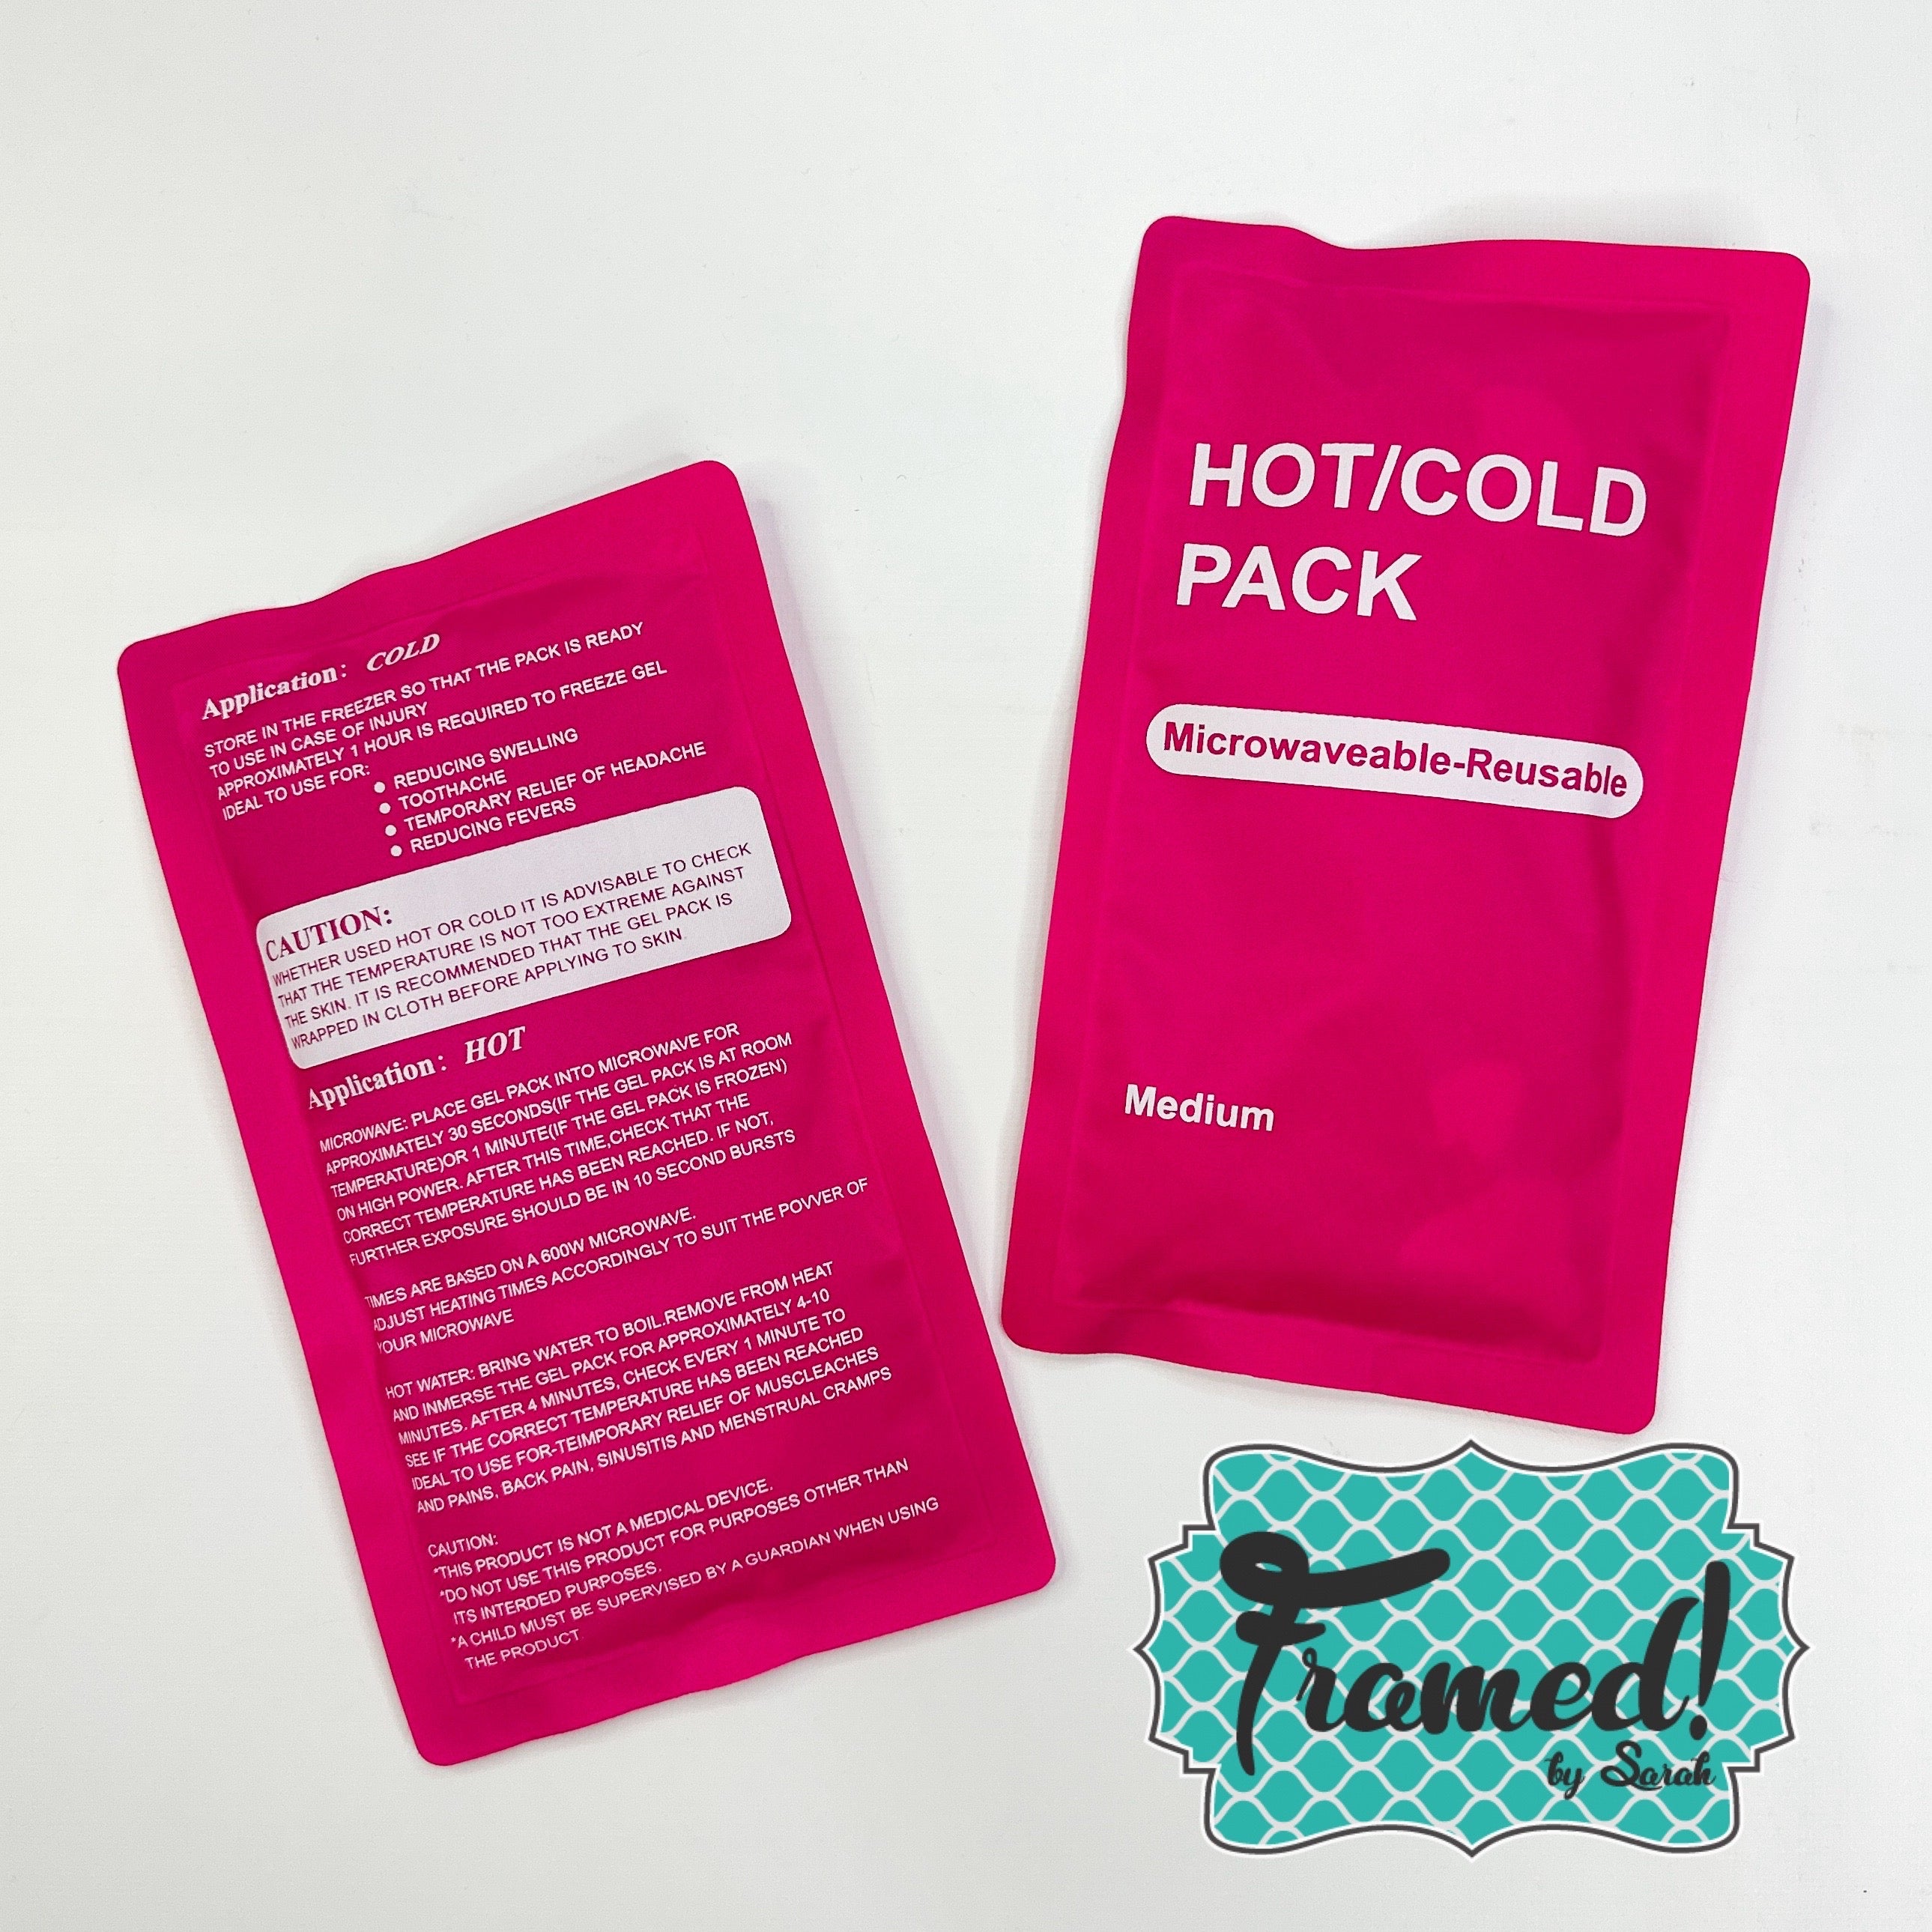 Set of 2 Reusable Hot/Cold Packs